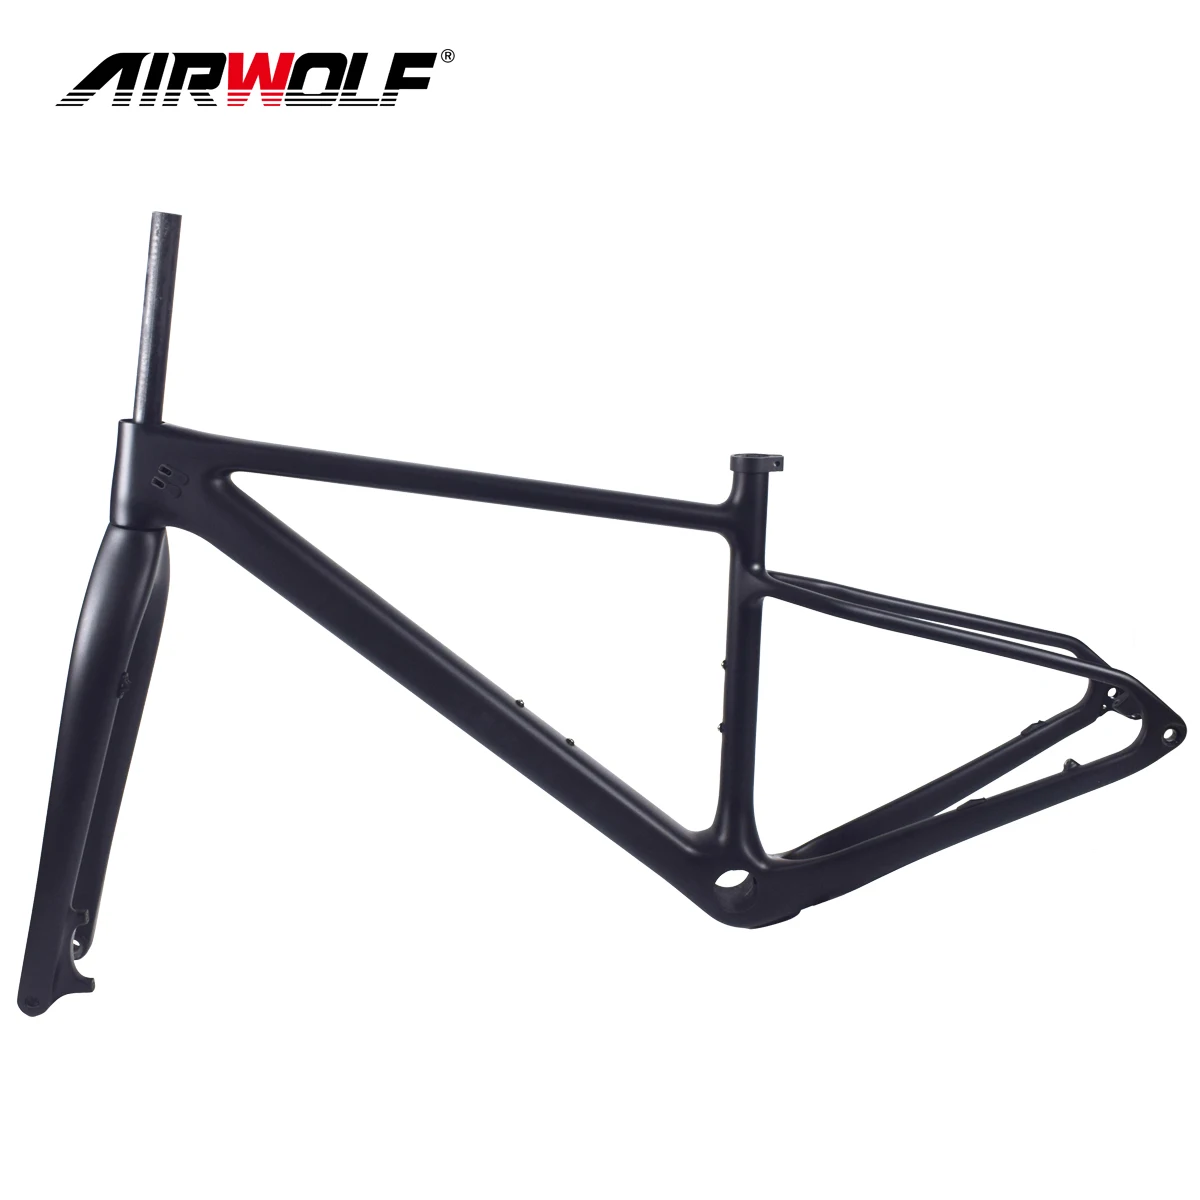 

Airwolf Carbon Mountain Bicycle Frame 29ER Boost With PF30 148*12/110*15 Thru Axle Fork